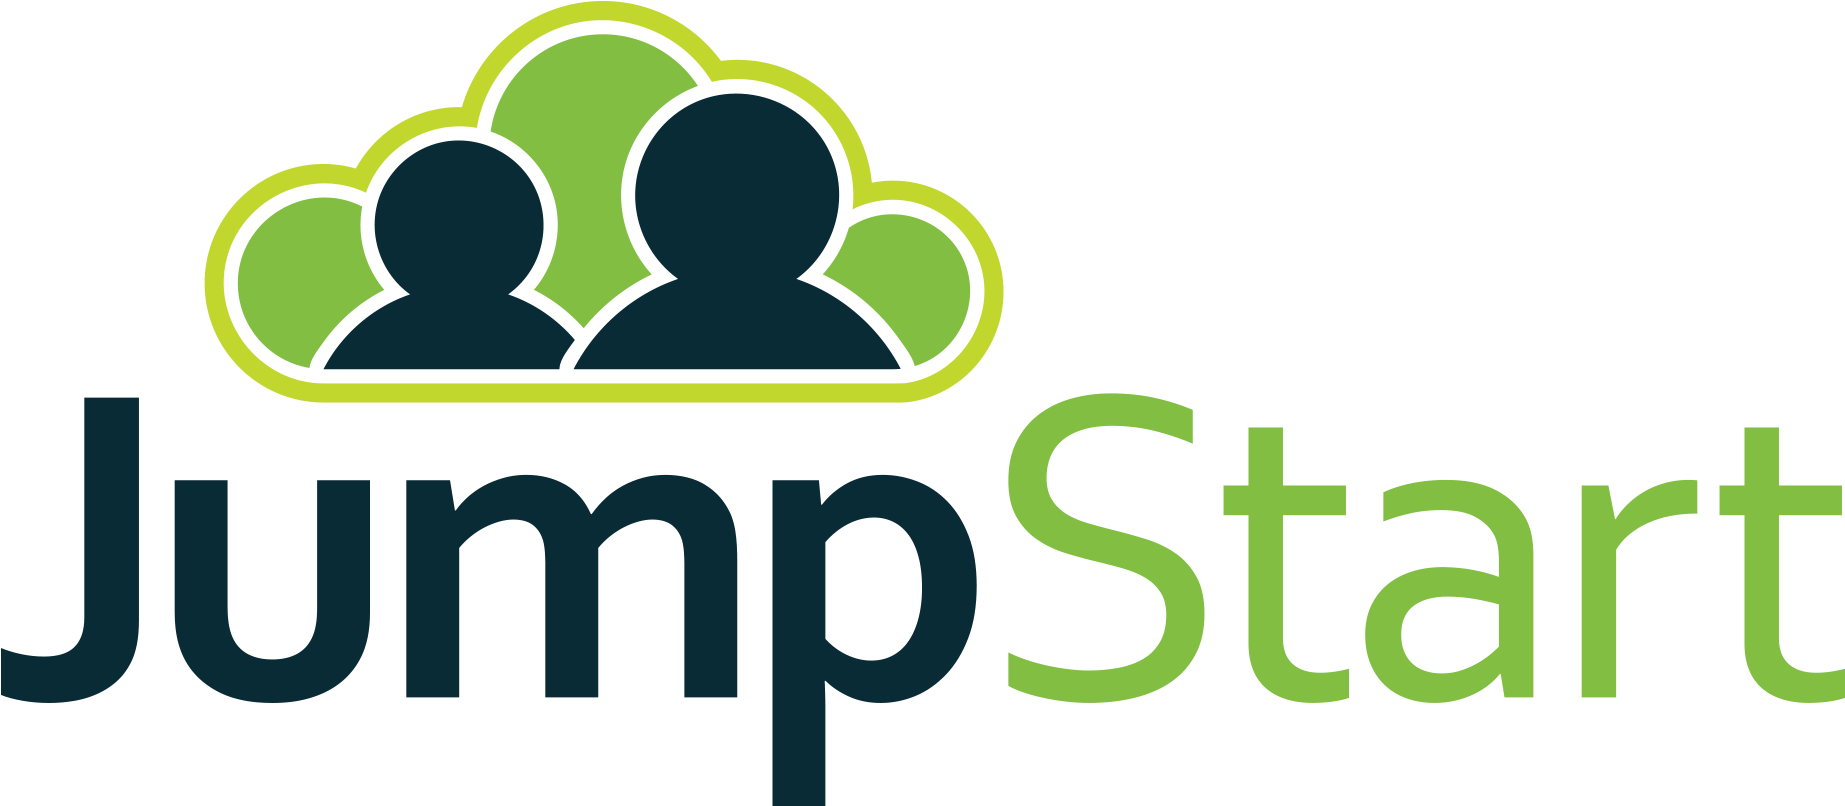 Unlimited Users & Support With Our Jumpstart Program - Logo (1920x865)